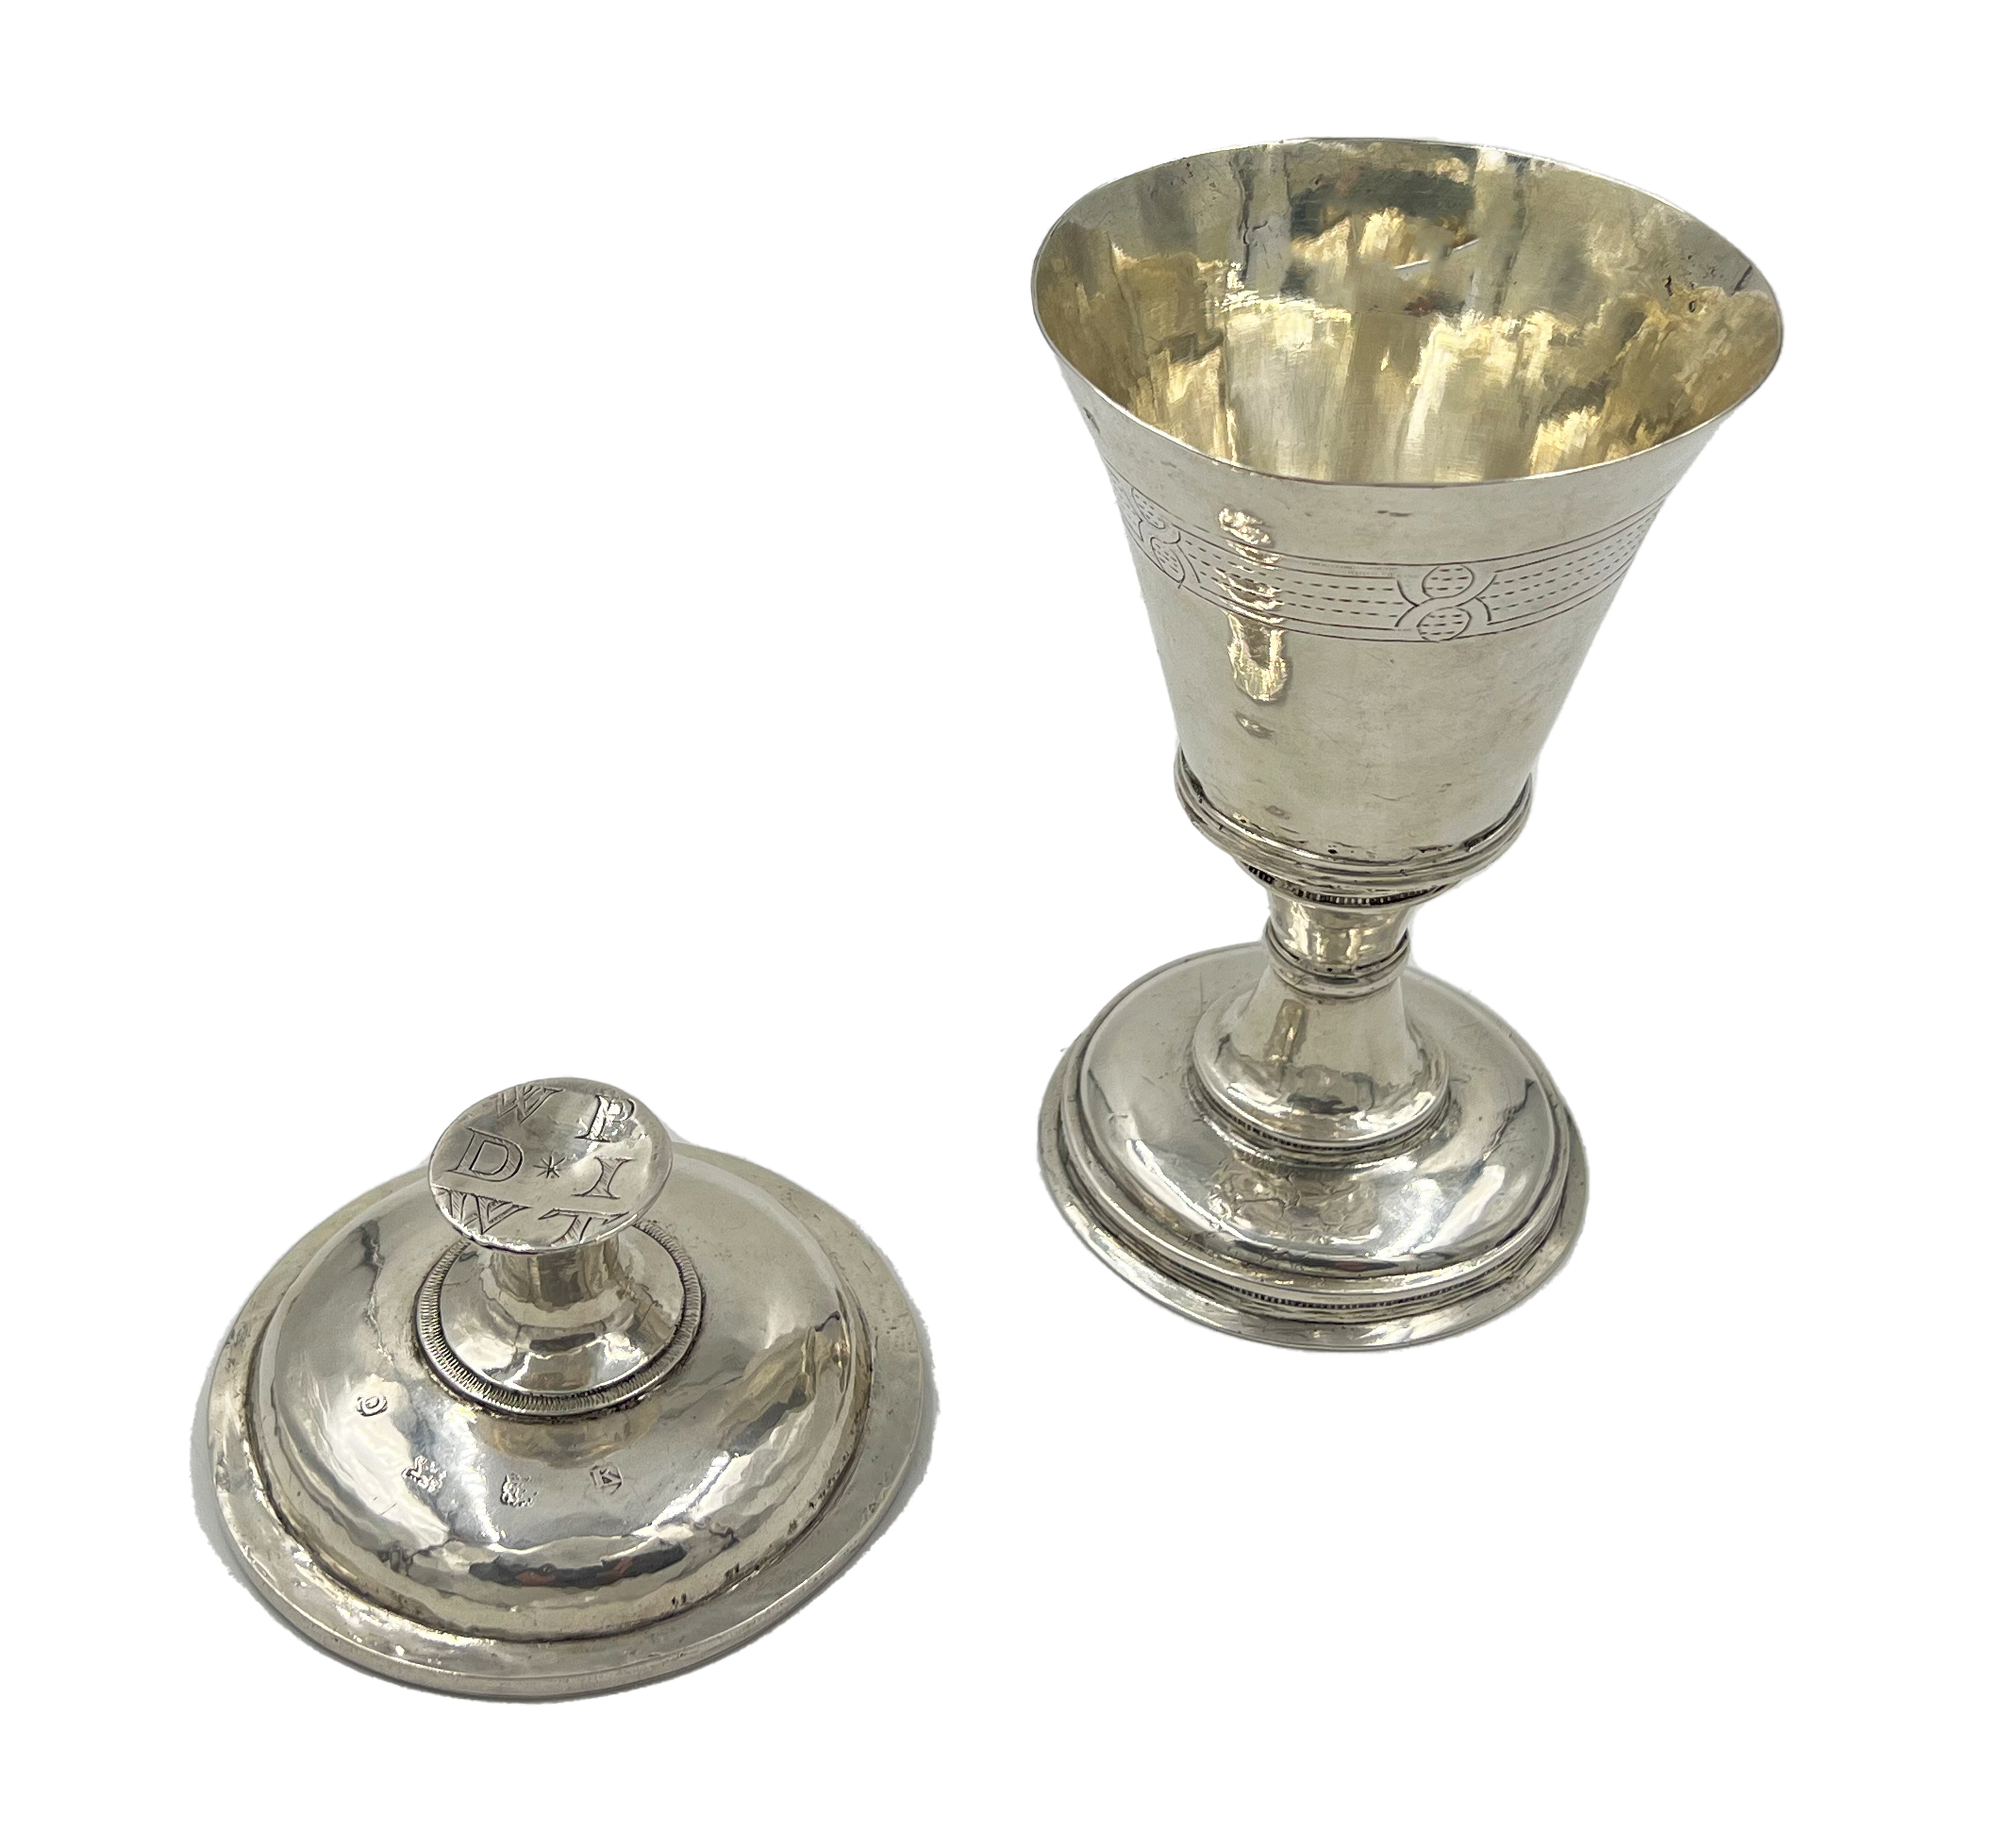 AN IMPORTANT AND RARE ELIZABETH I SILVER COMMUNION CUP AND PATEN, LONDON, 1587 - Image 3 of 7